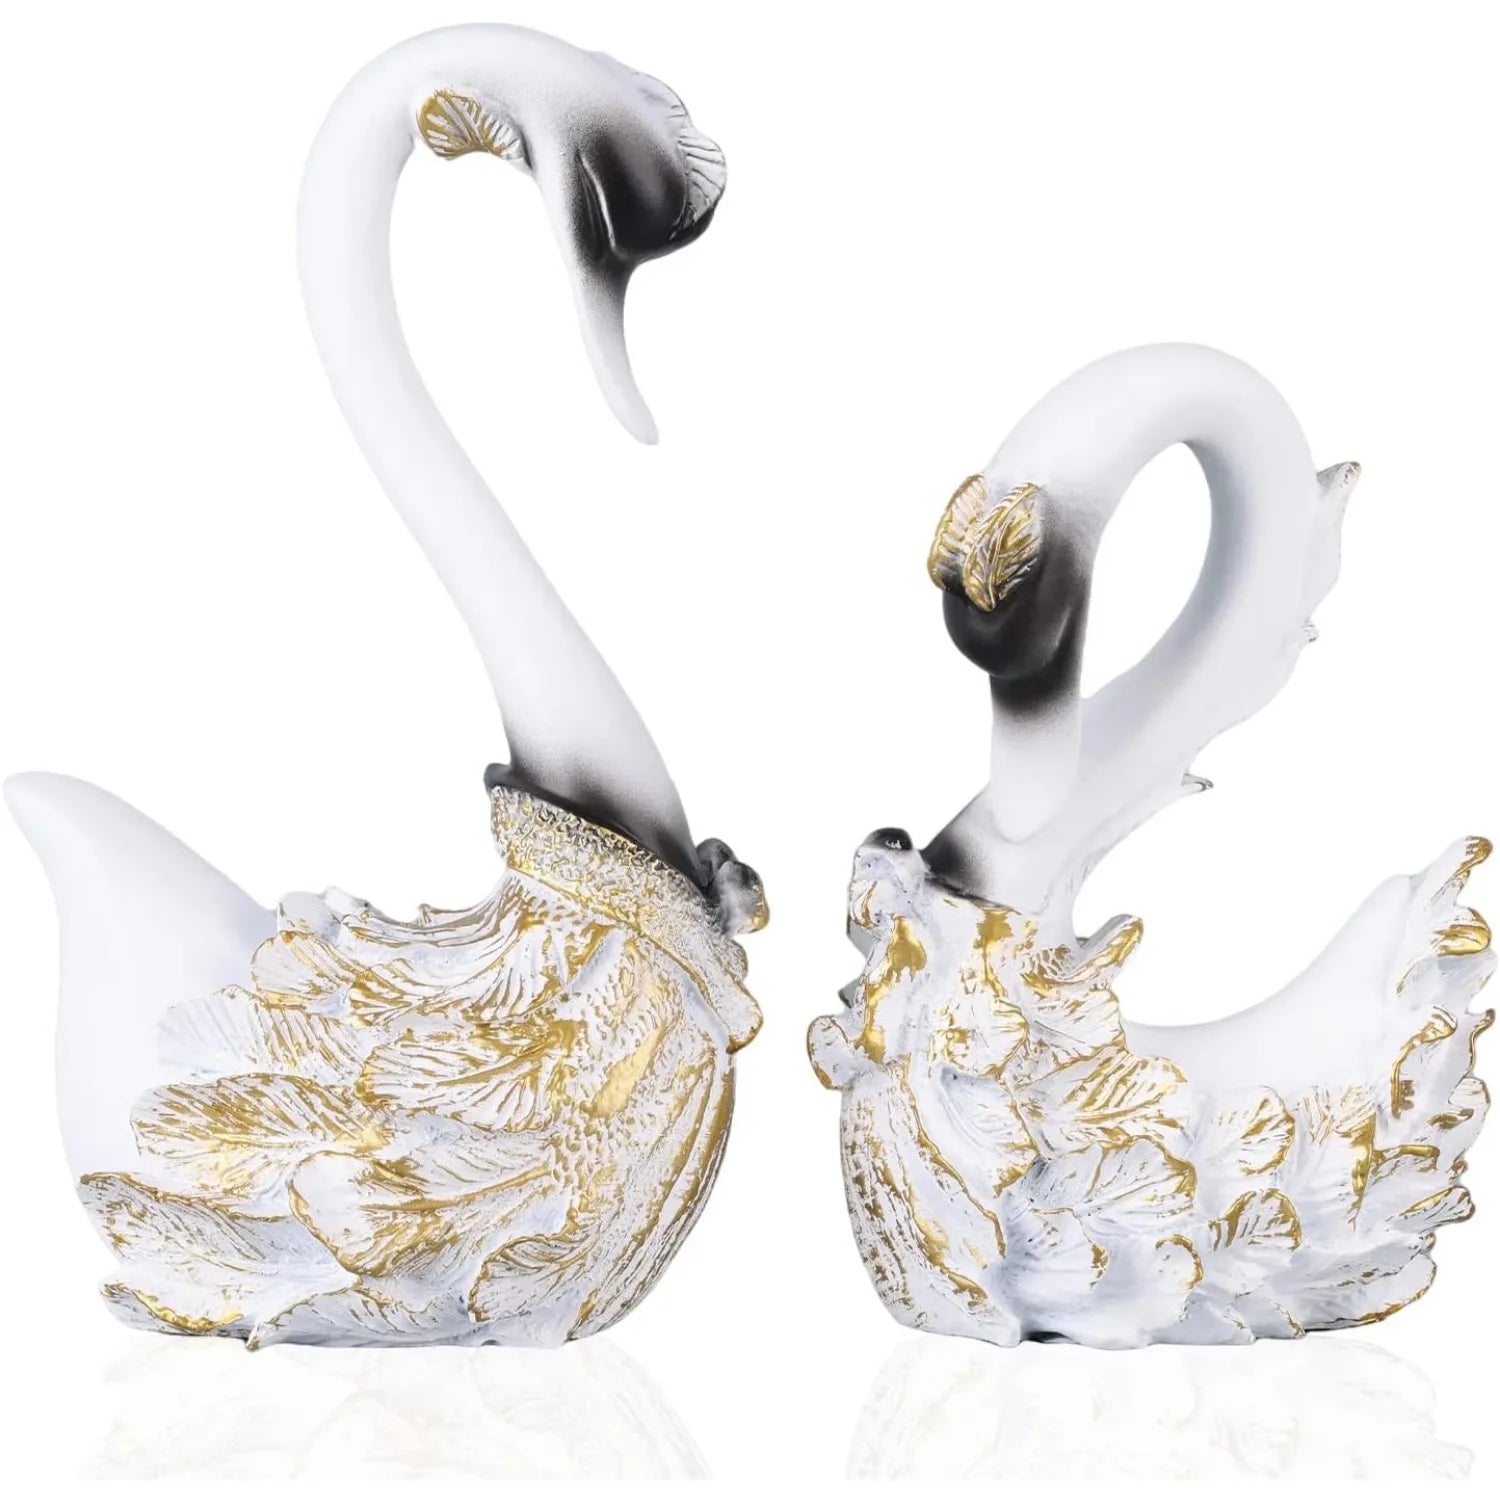 2 Pcs Swan Sculpture, Couple Swan Decorative Statue Modern Home Decor  for Living Room Bedroom, Coffee Table Decor acacuss